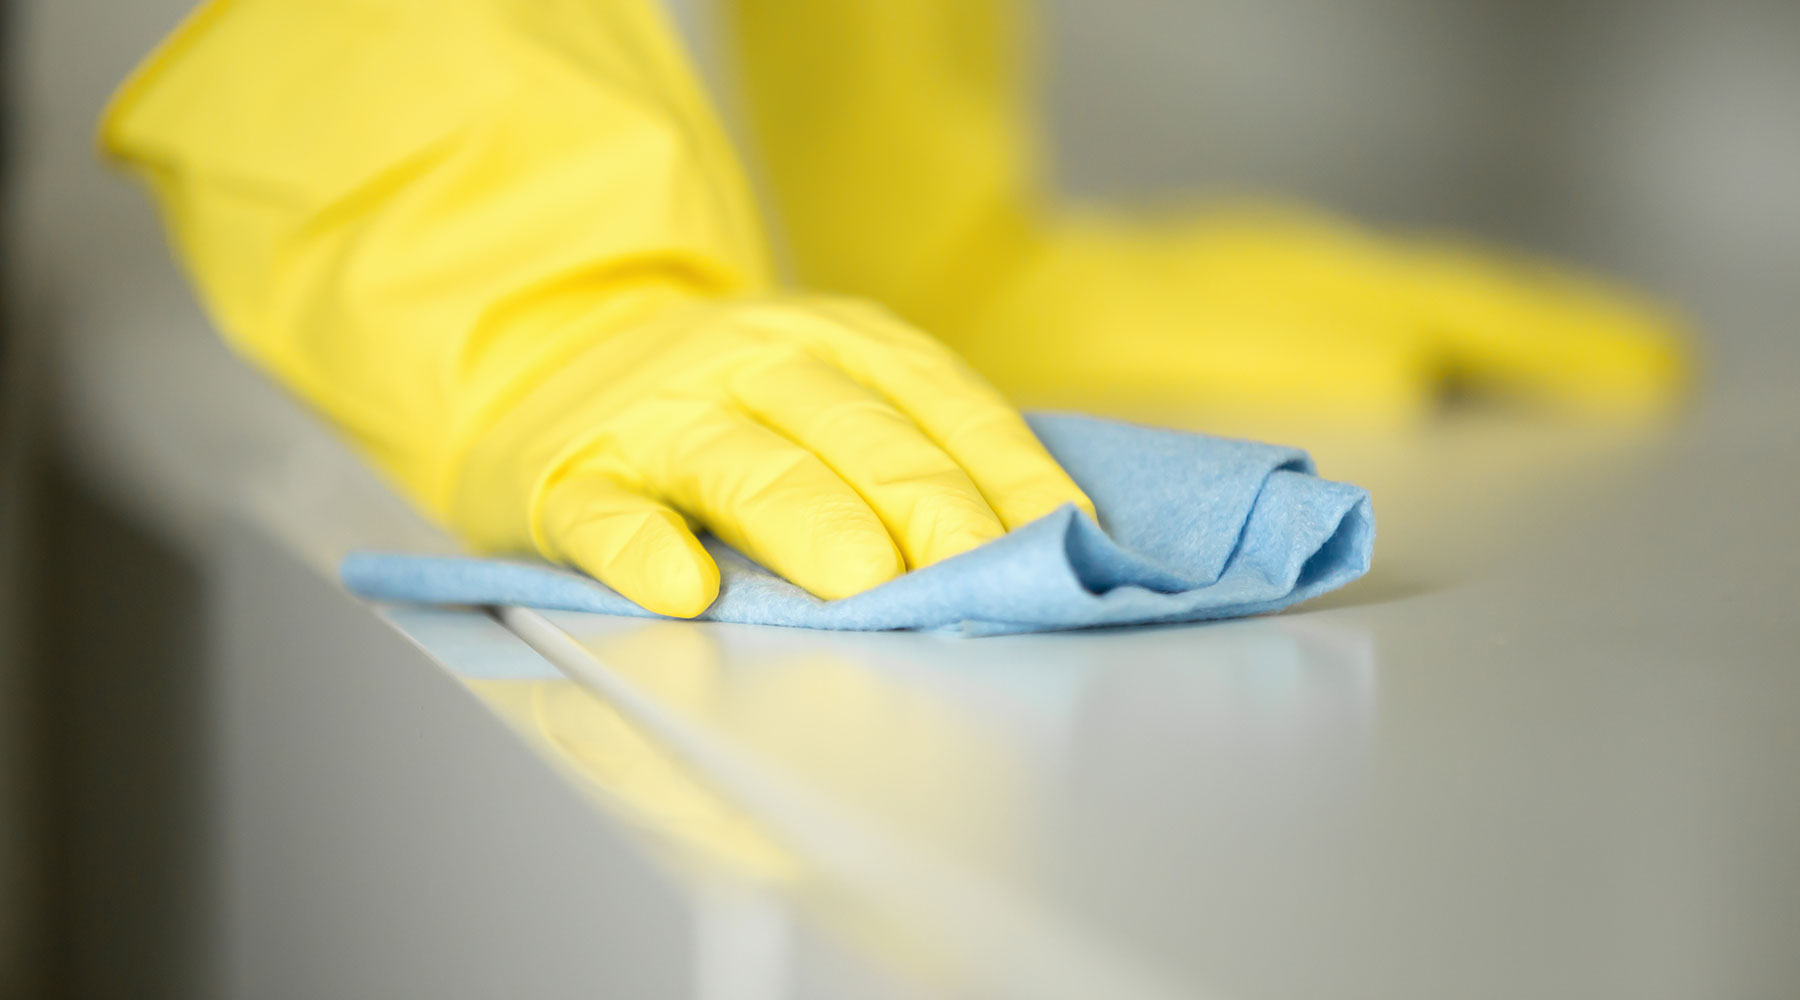 Gloved hands sanitizing a surface